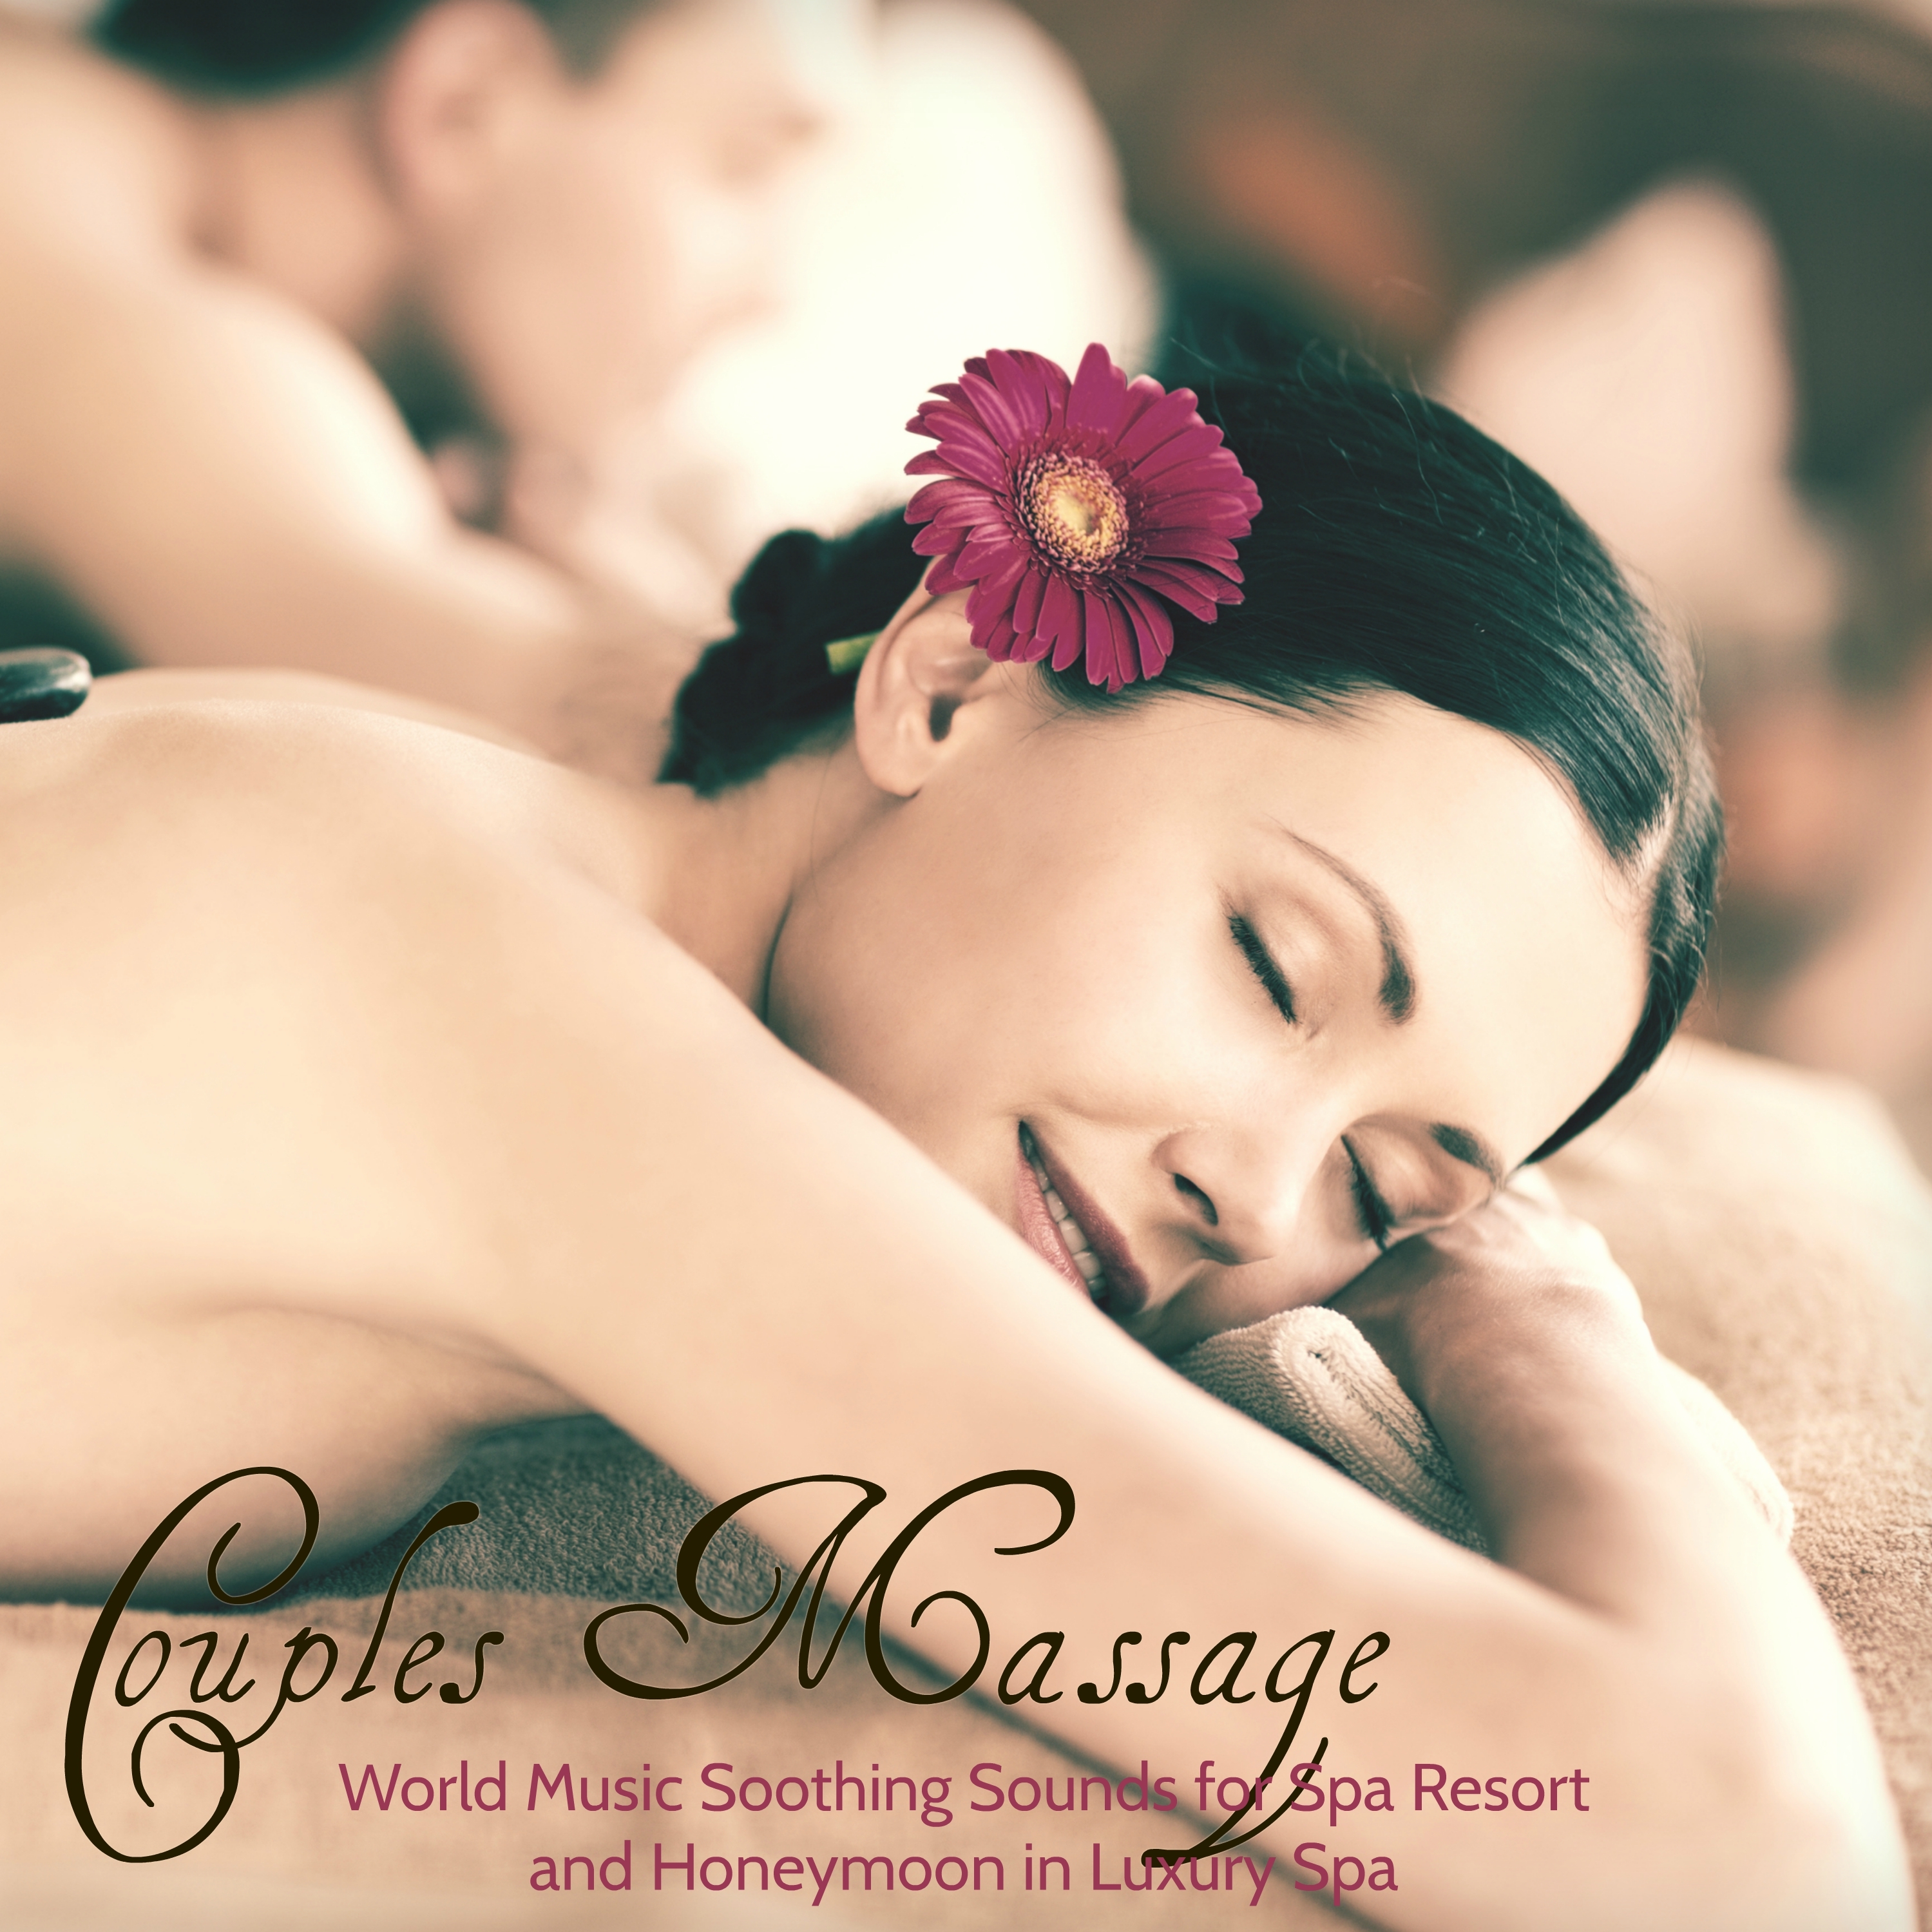 Soothing Sounds for Spa